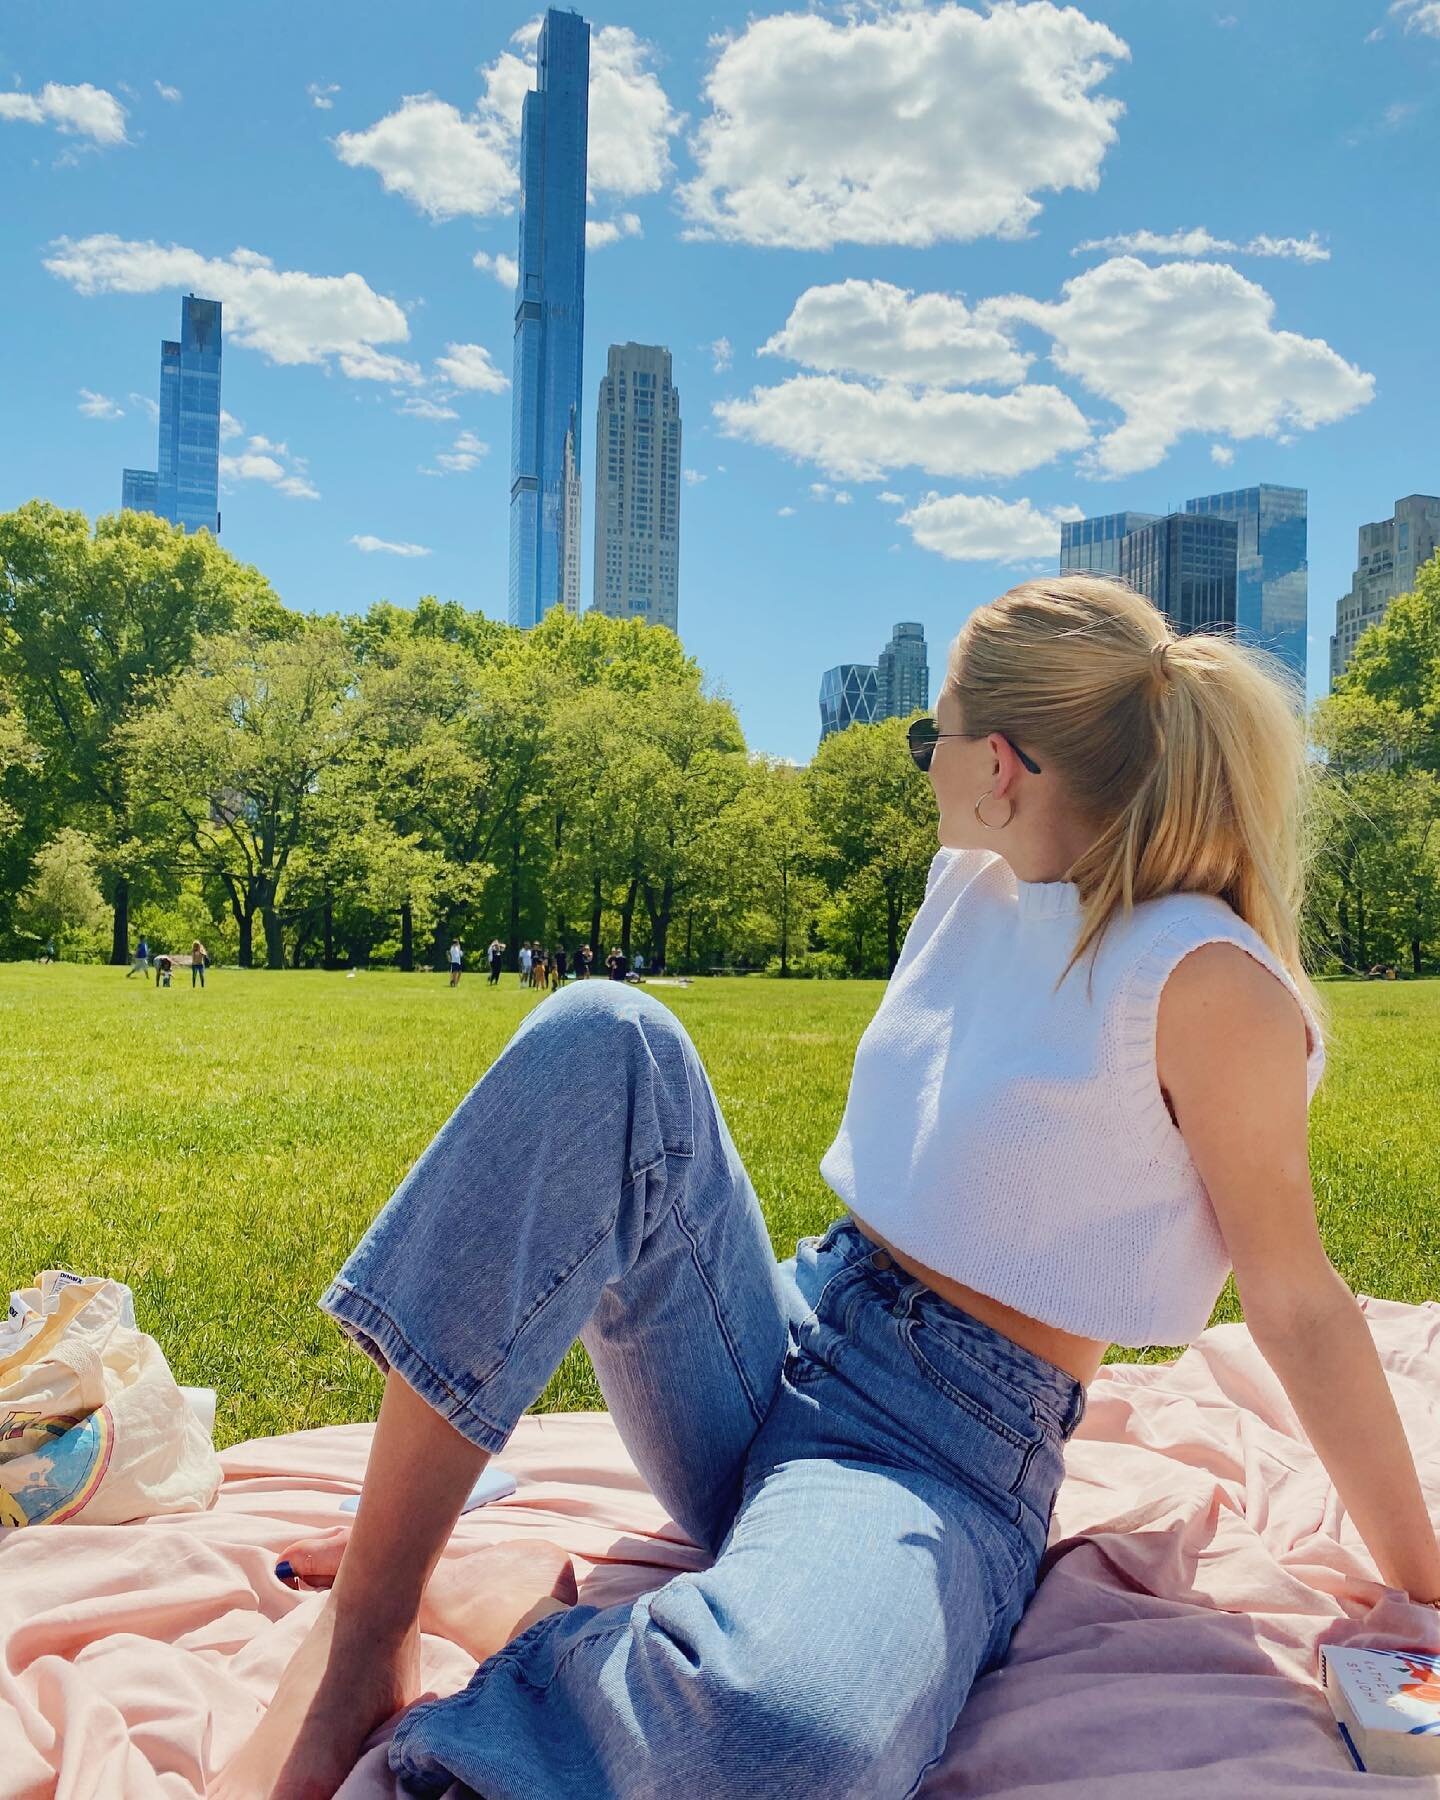 picnics in the park with a view🦋